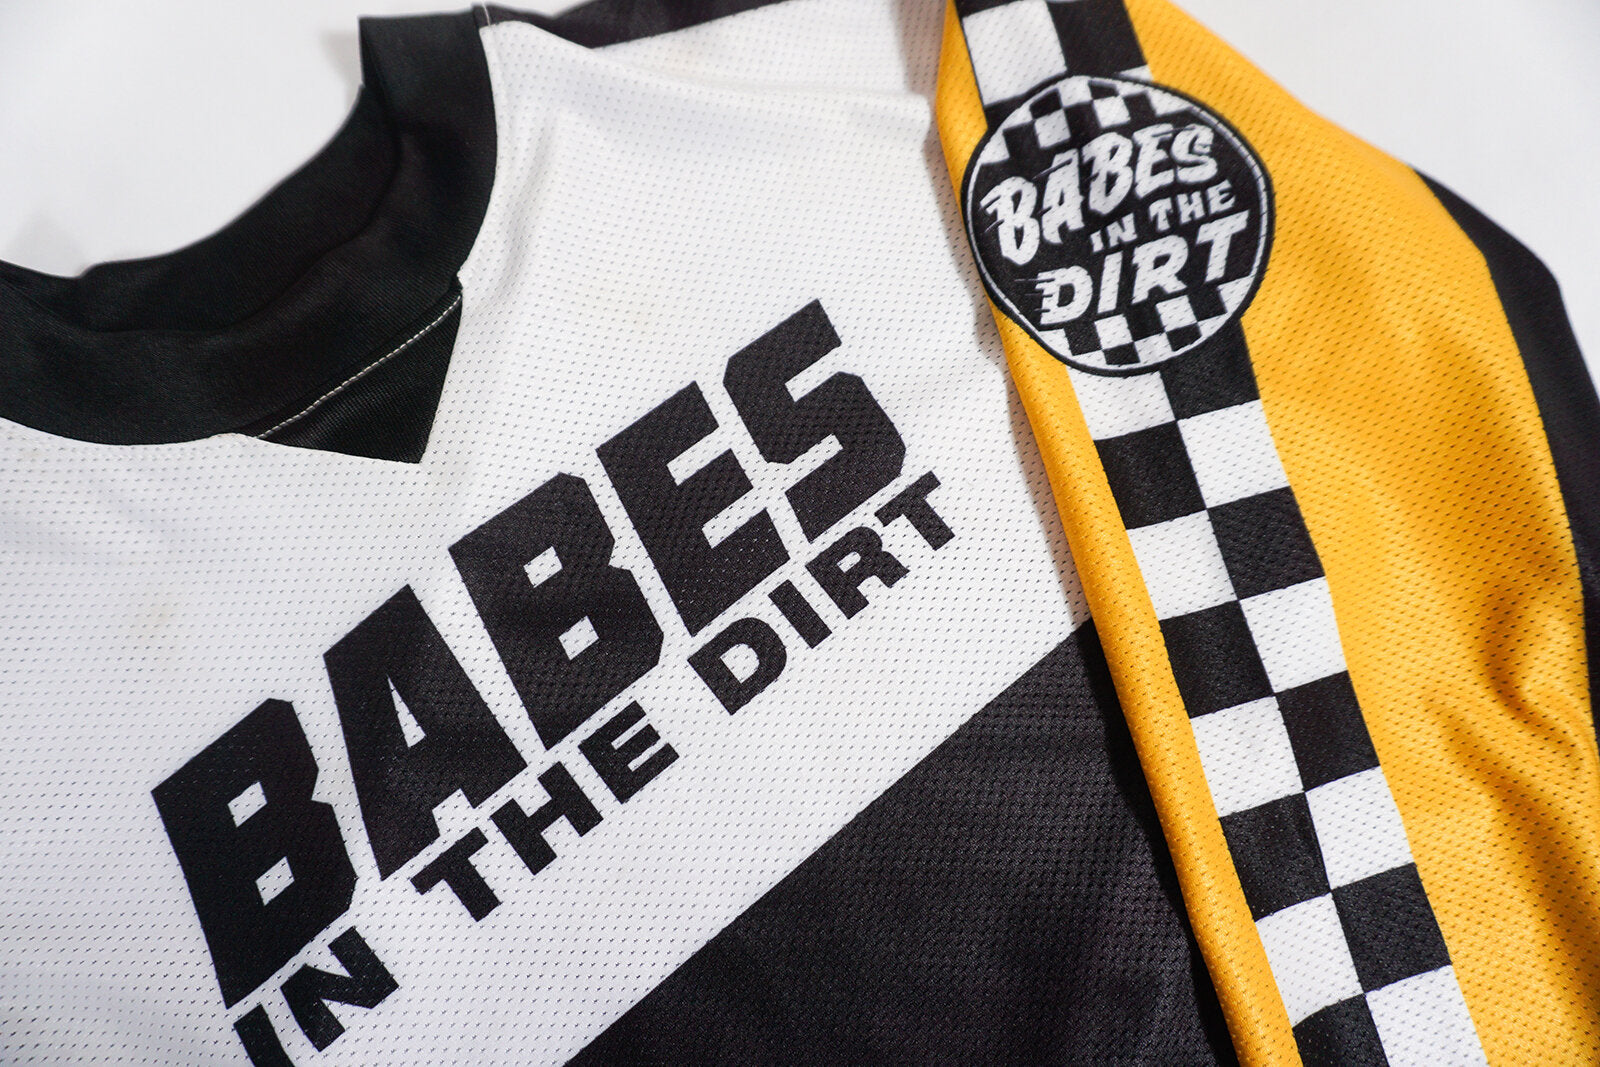 Babes in the Dirt Jersey